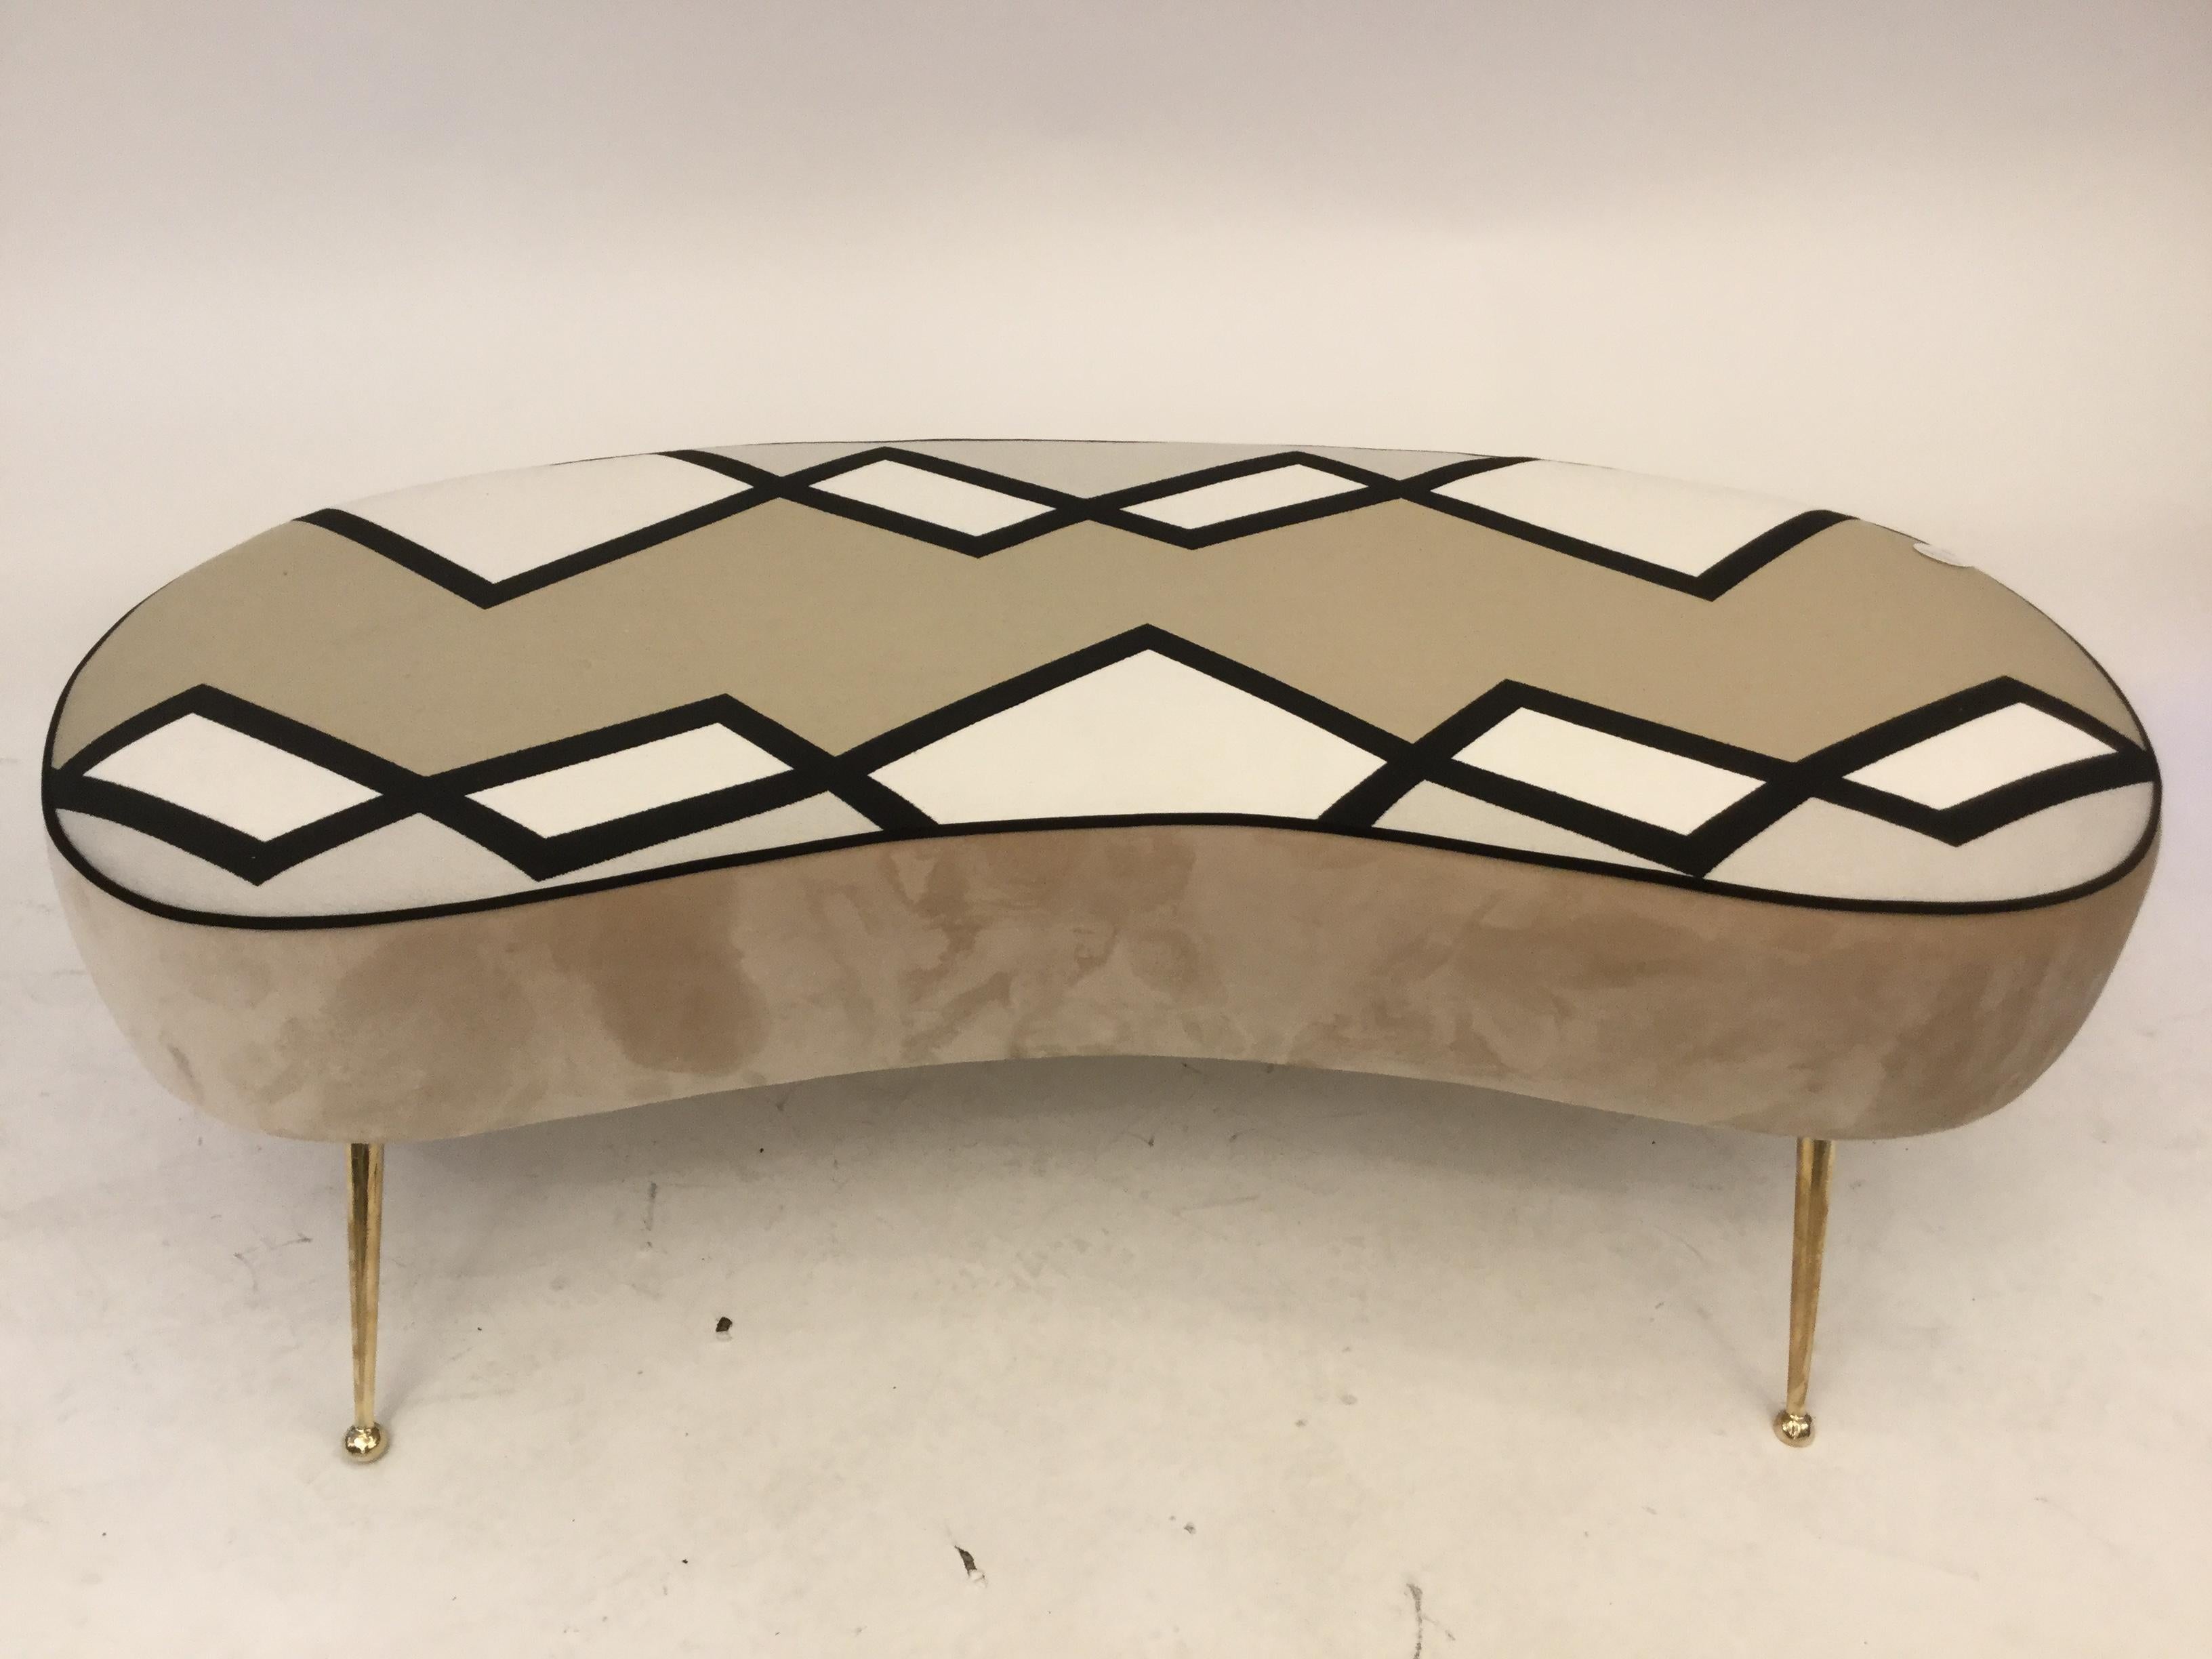 An Italian designed bean shaped bench reupholstered in velvety fabric on brass legs leading to ball feet with a geometric motif midcentury design.